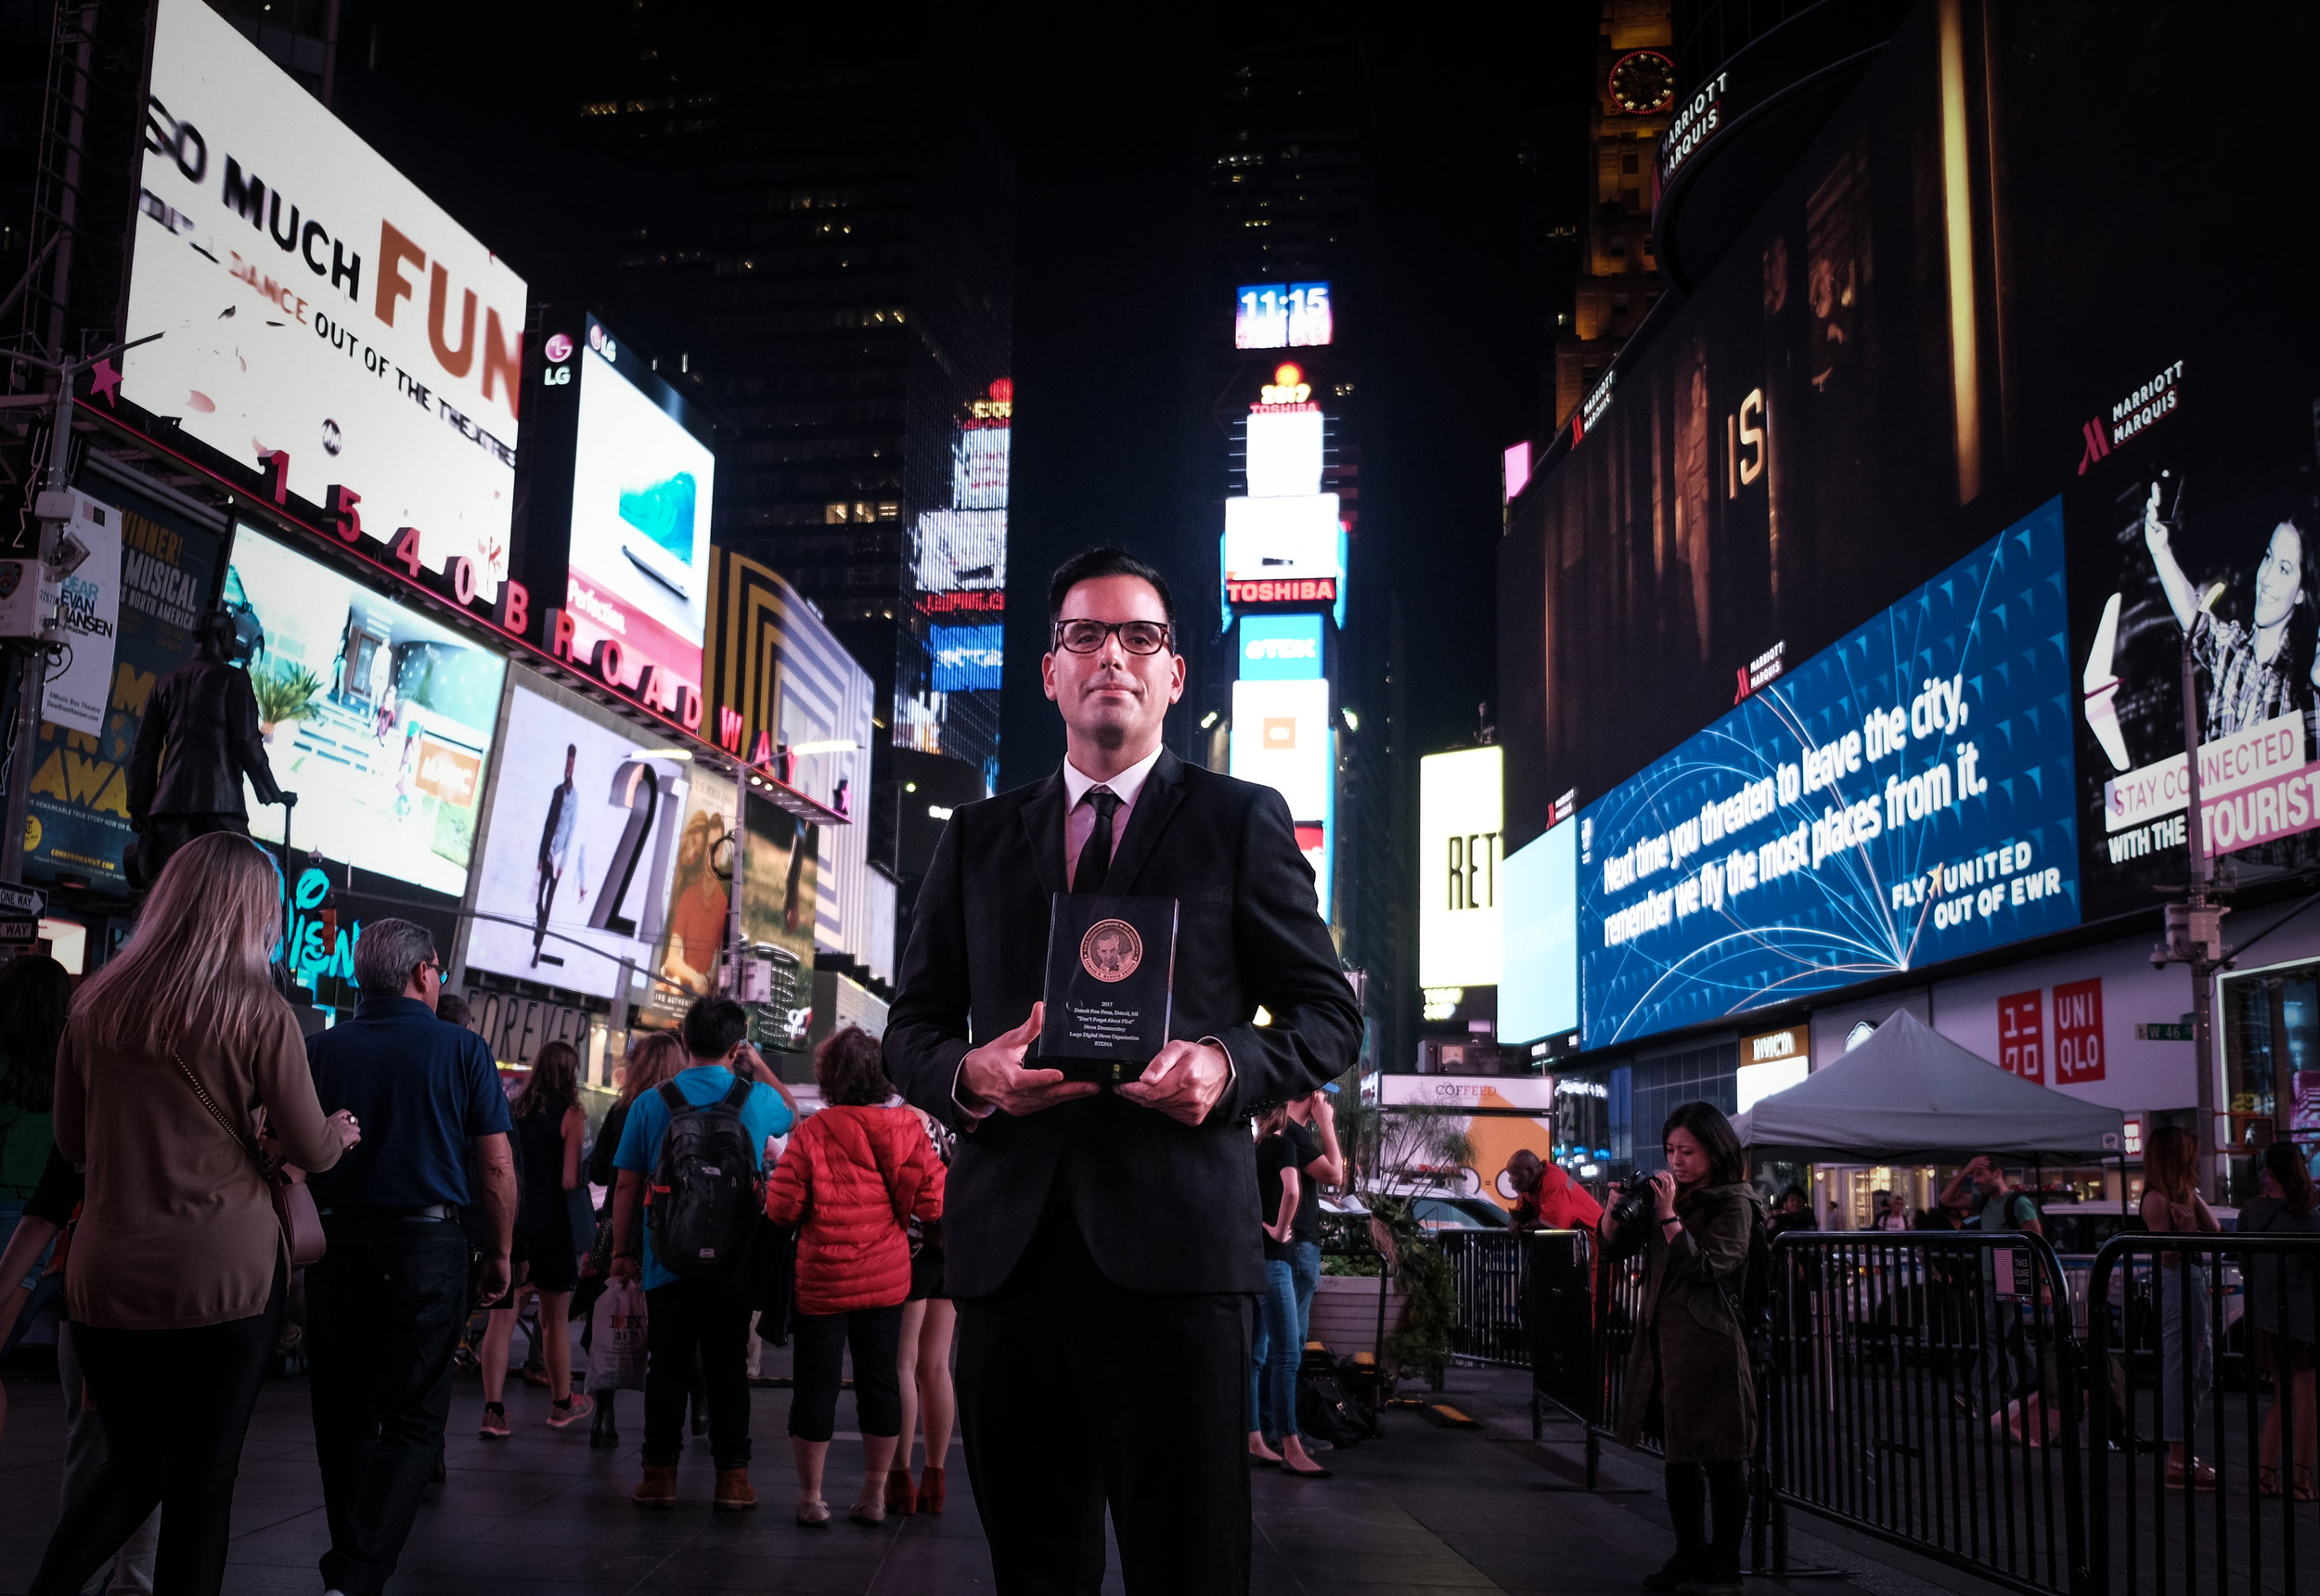  Pop Mod Photo co-owner Ryan Garza poses for a photo in Times Square with his Edward R. Murrow award following the Edward R. Murrow Awards Gala in New York City. Garza's work on the Flint Water Crisis for the Detroit Free Press with co-worker Brian K